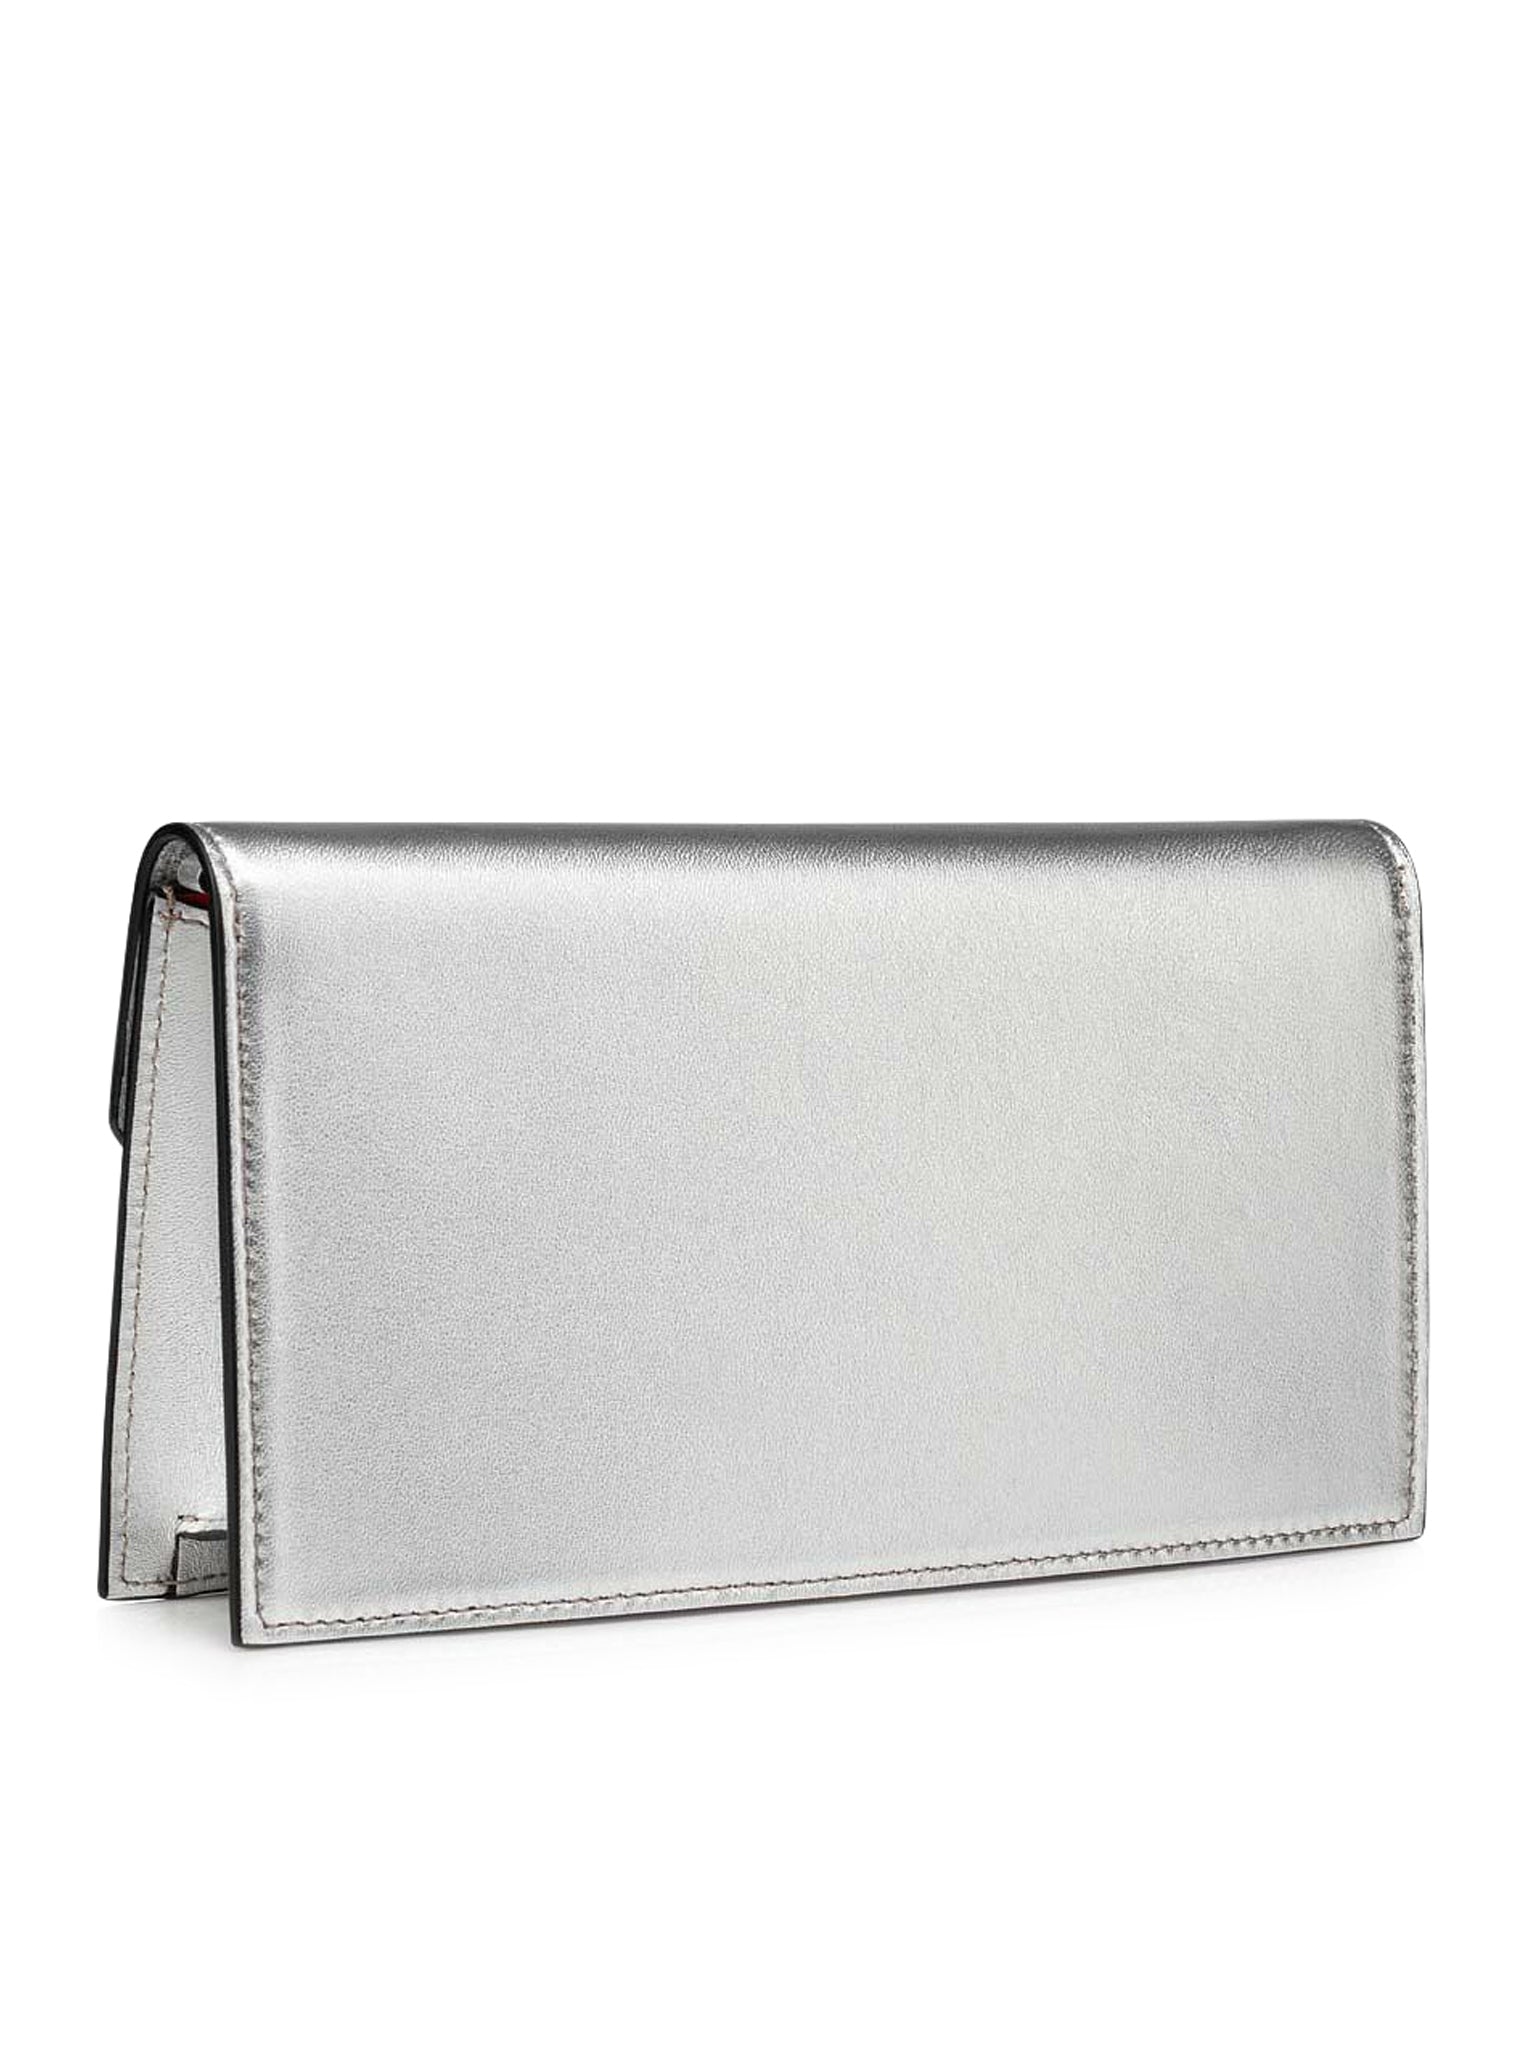 Loubi54 Clutch - Iridescent nappa leather - Silver